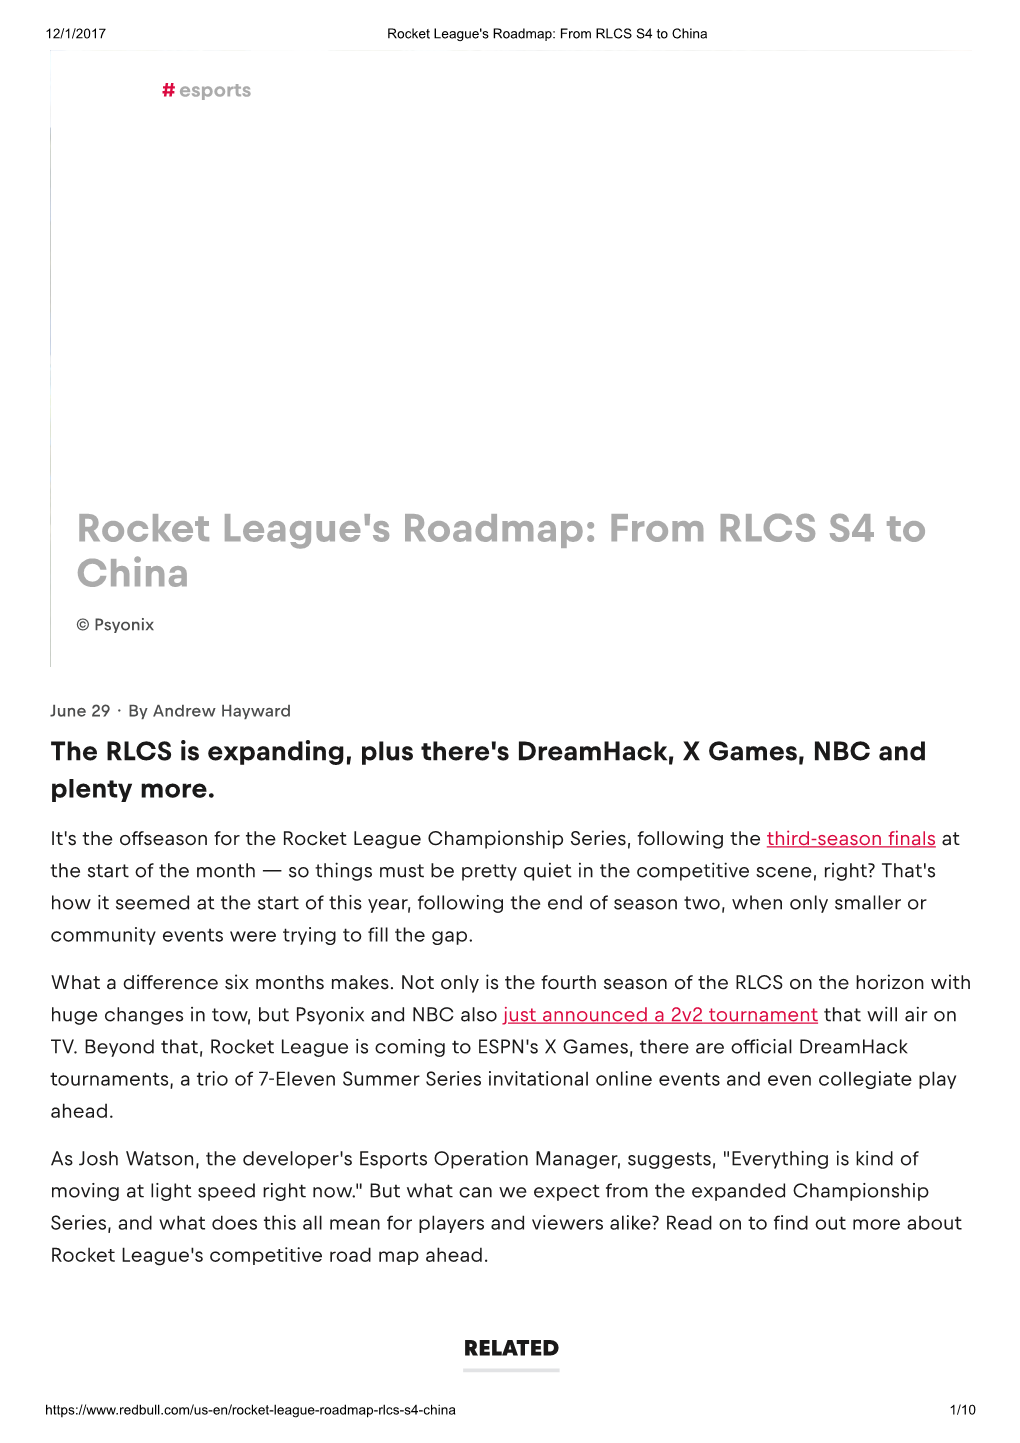 Rocket League's Roadmap: from RLCS S4 to China